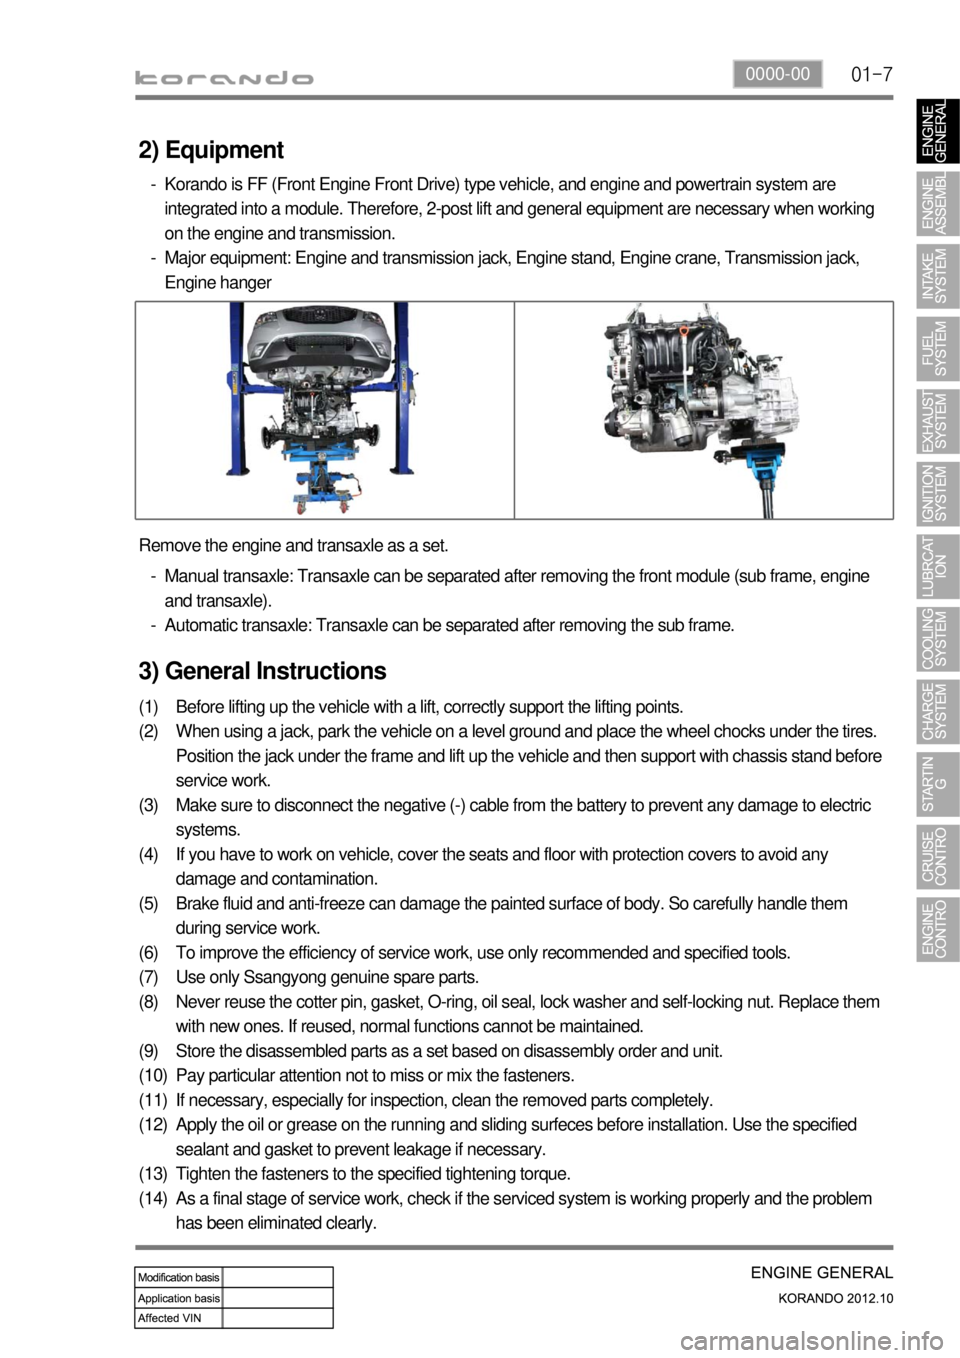 SSANGYONG KORANDO 2012  Service Manual 01-70000-00
3) General Instructions
Before lifting up the vehicle with a lift, correctly support the lifting points.
When using a jack, park the vehicle on a level ground and place the wheel chocks un